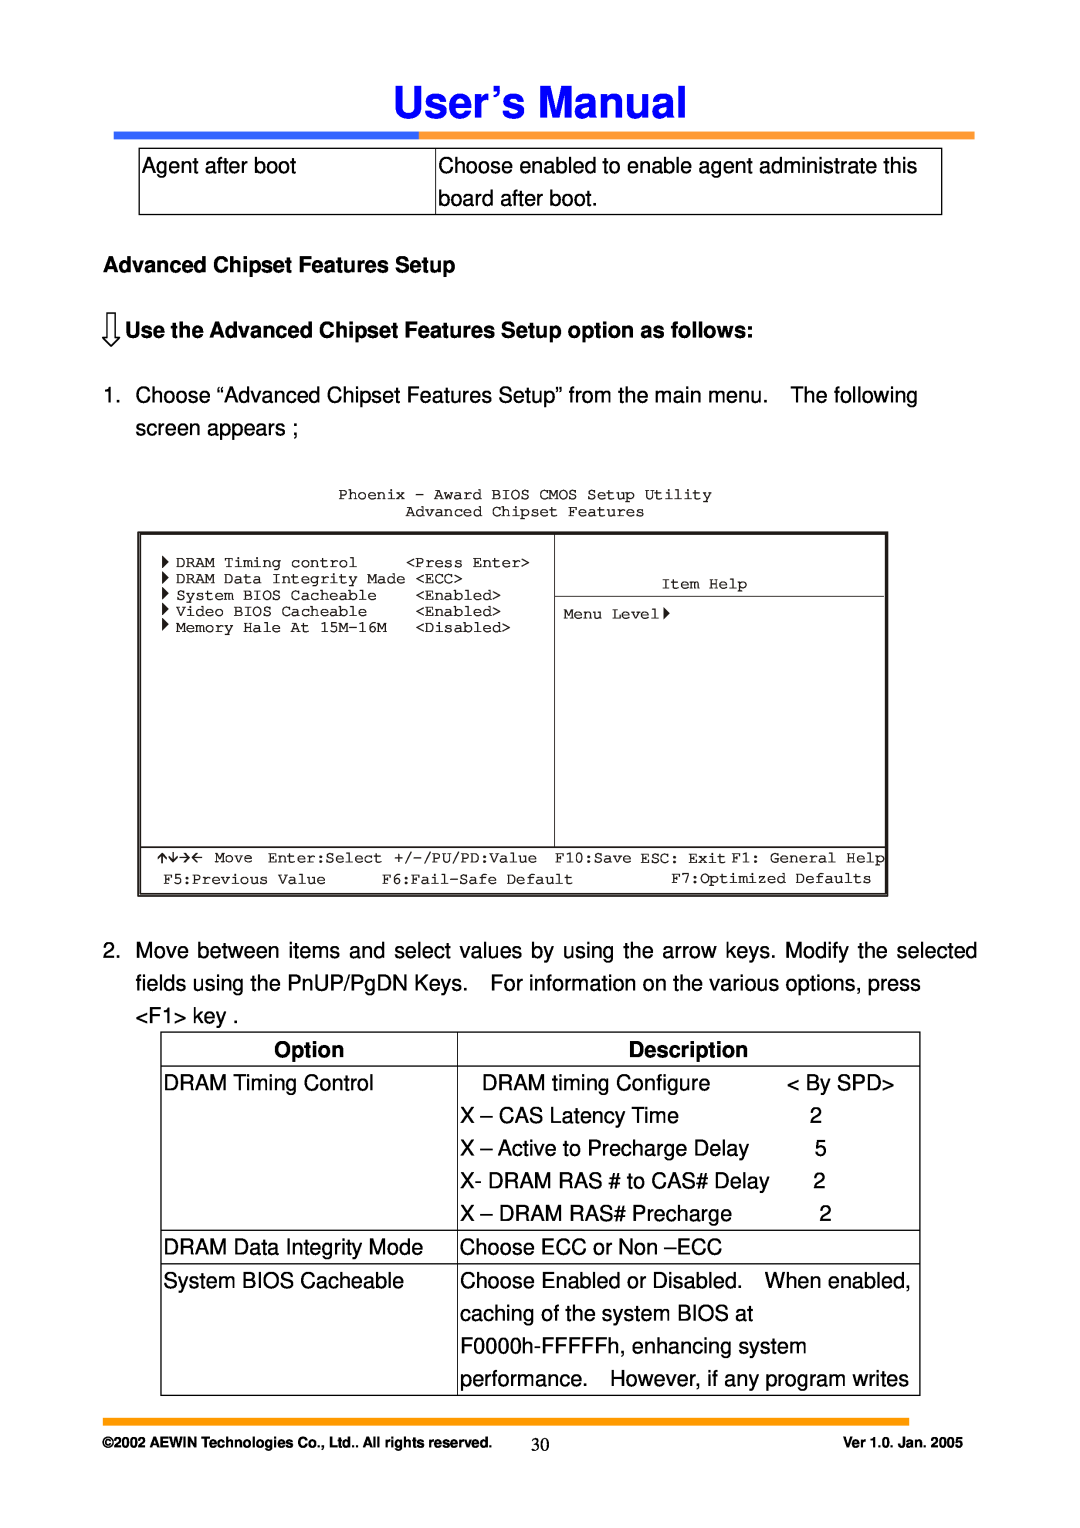 Intel AW-A795 user manual Use the Advanced Chipset Features Setup option as follows, User’s Manual, Option, Description 